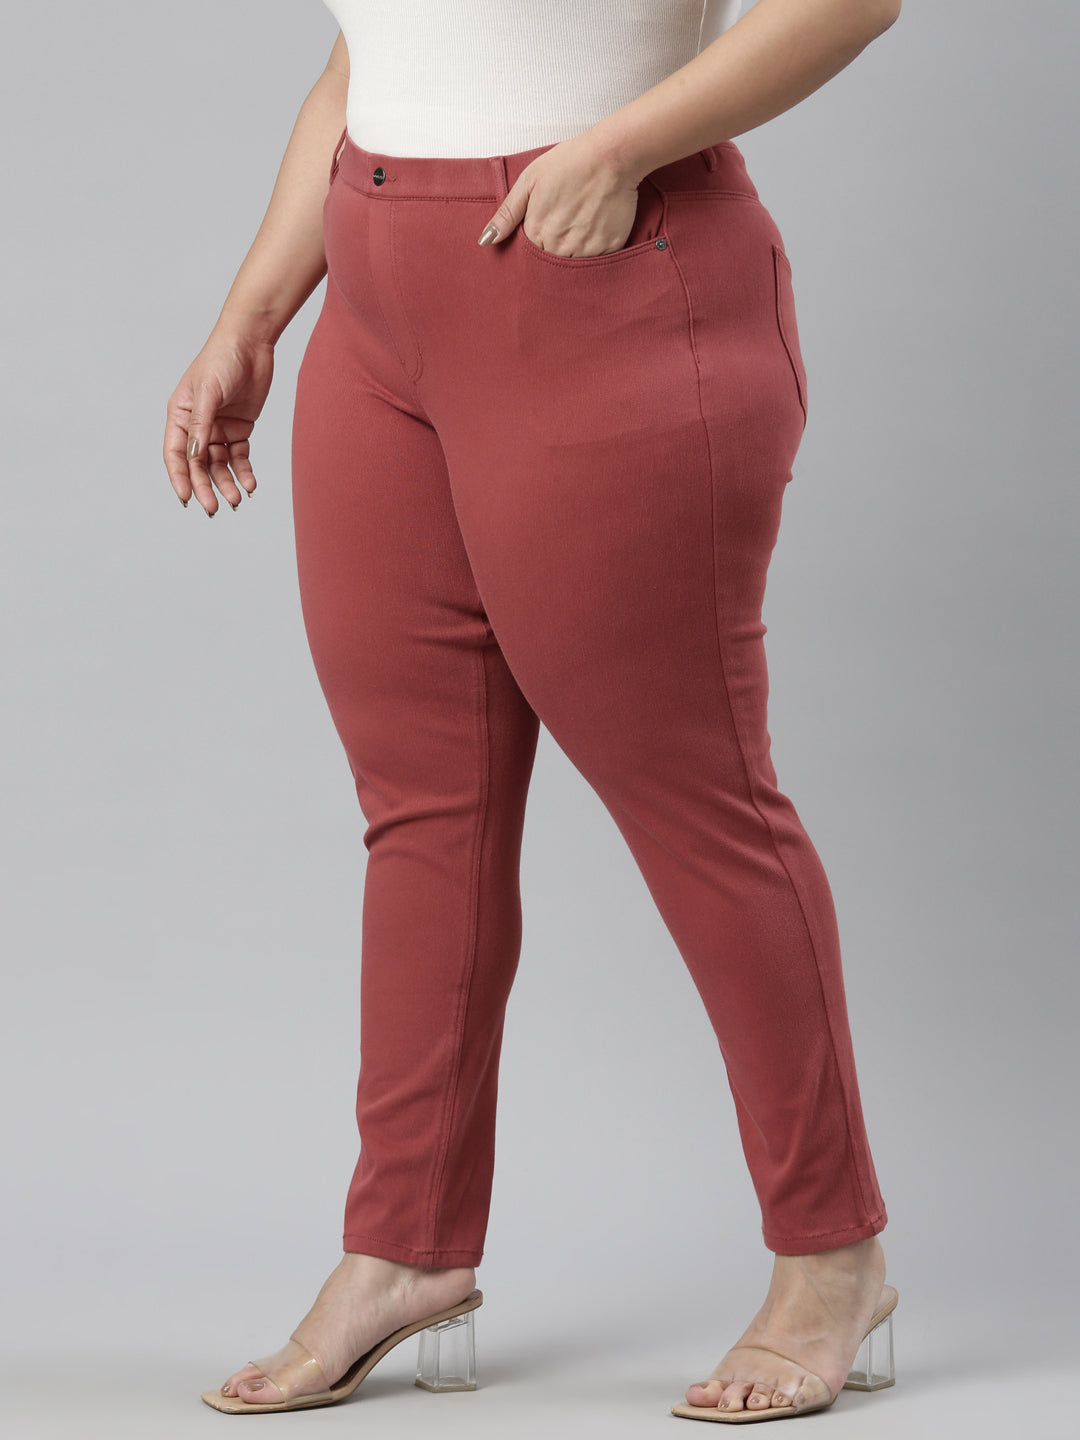 Women Solid Young Red Super Stretch Jeggings